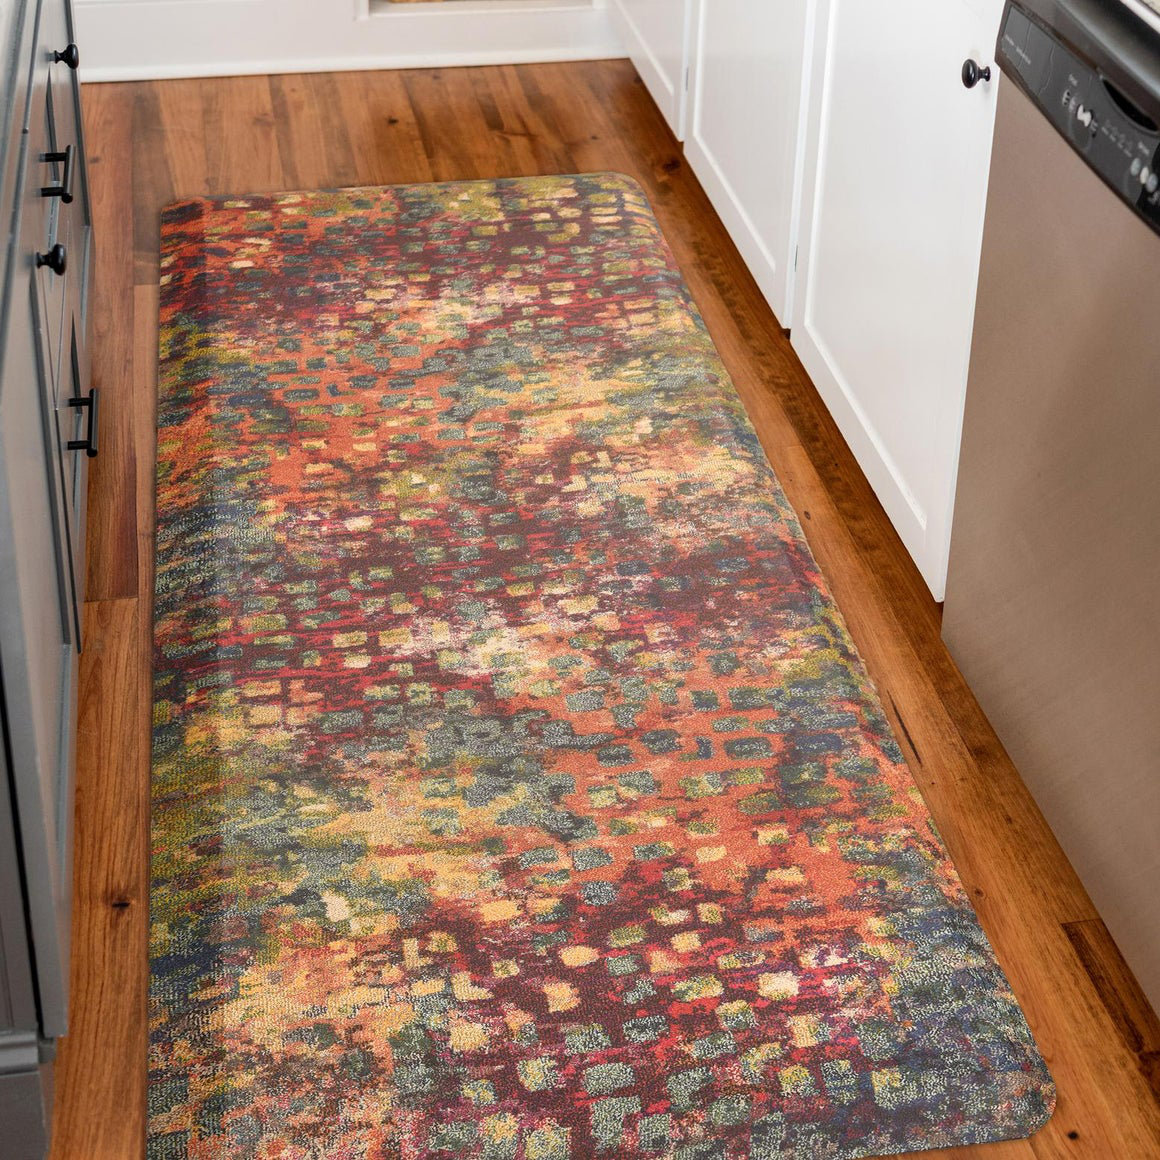 Color G Extra Long Kitchen Runner Rugs Non Skid, Kitchen Mats for